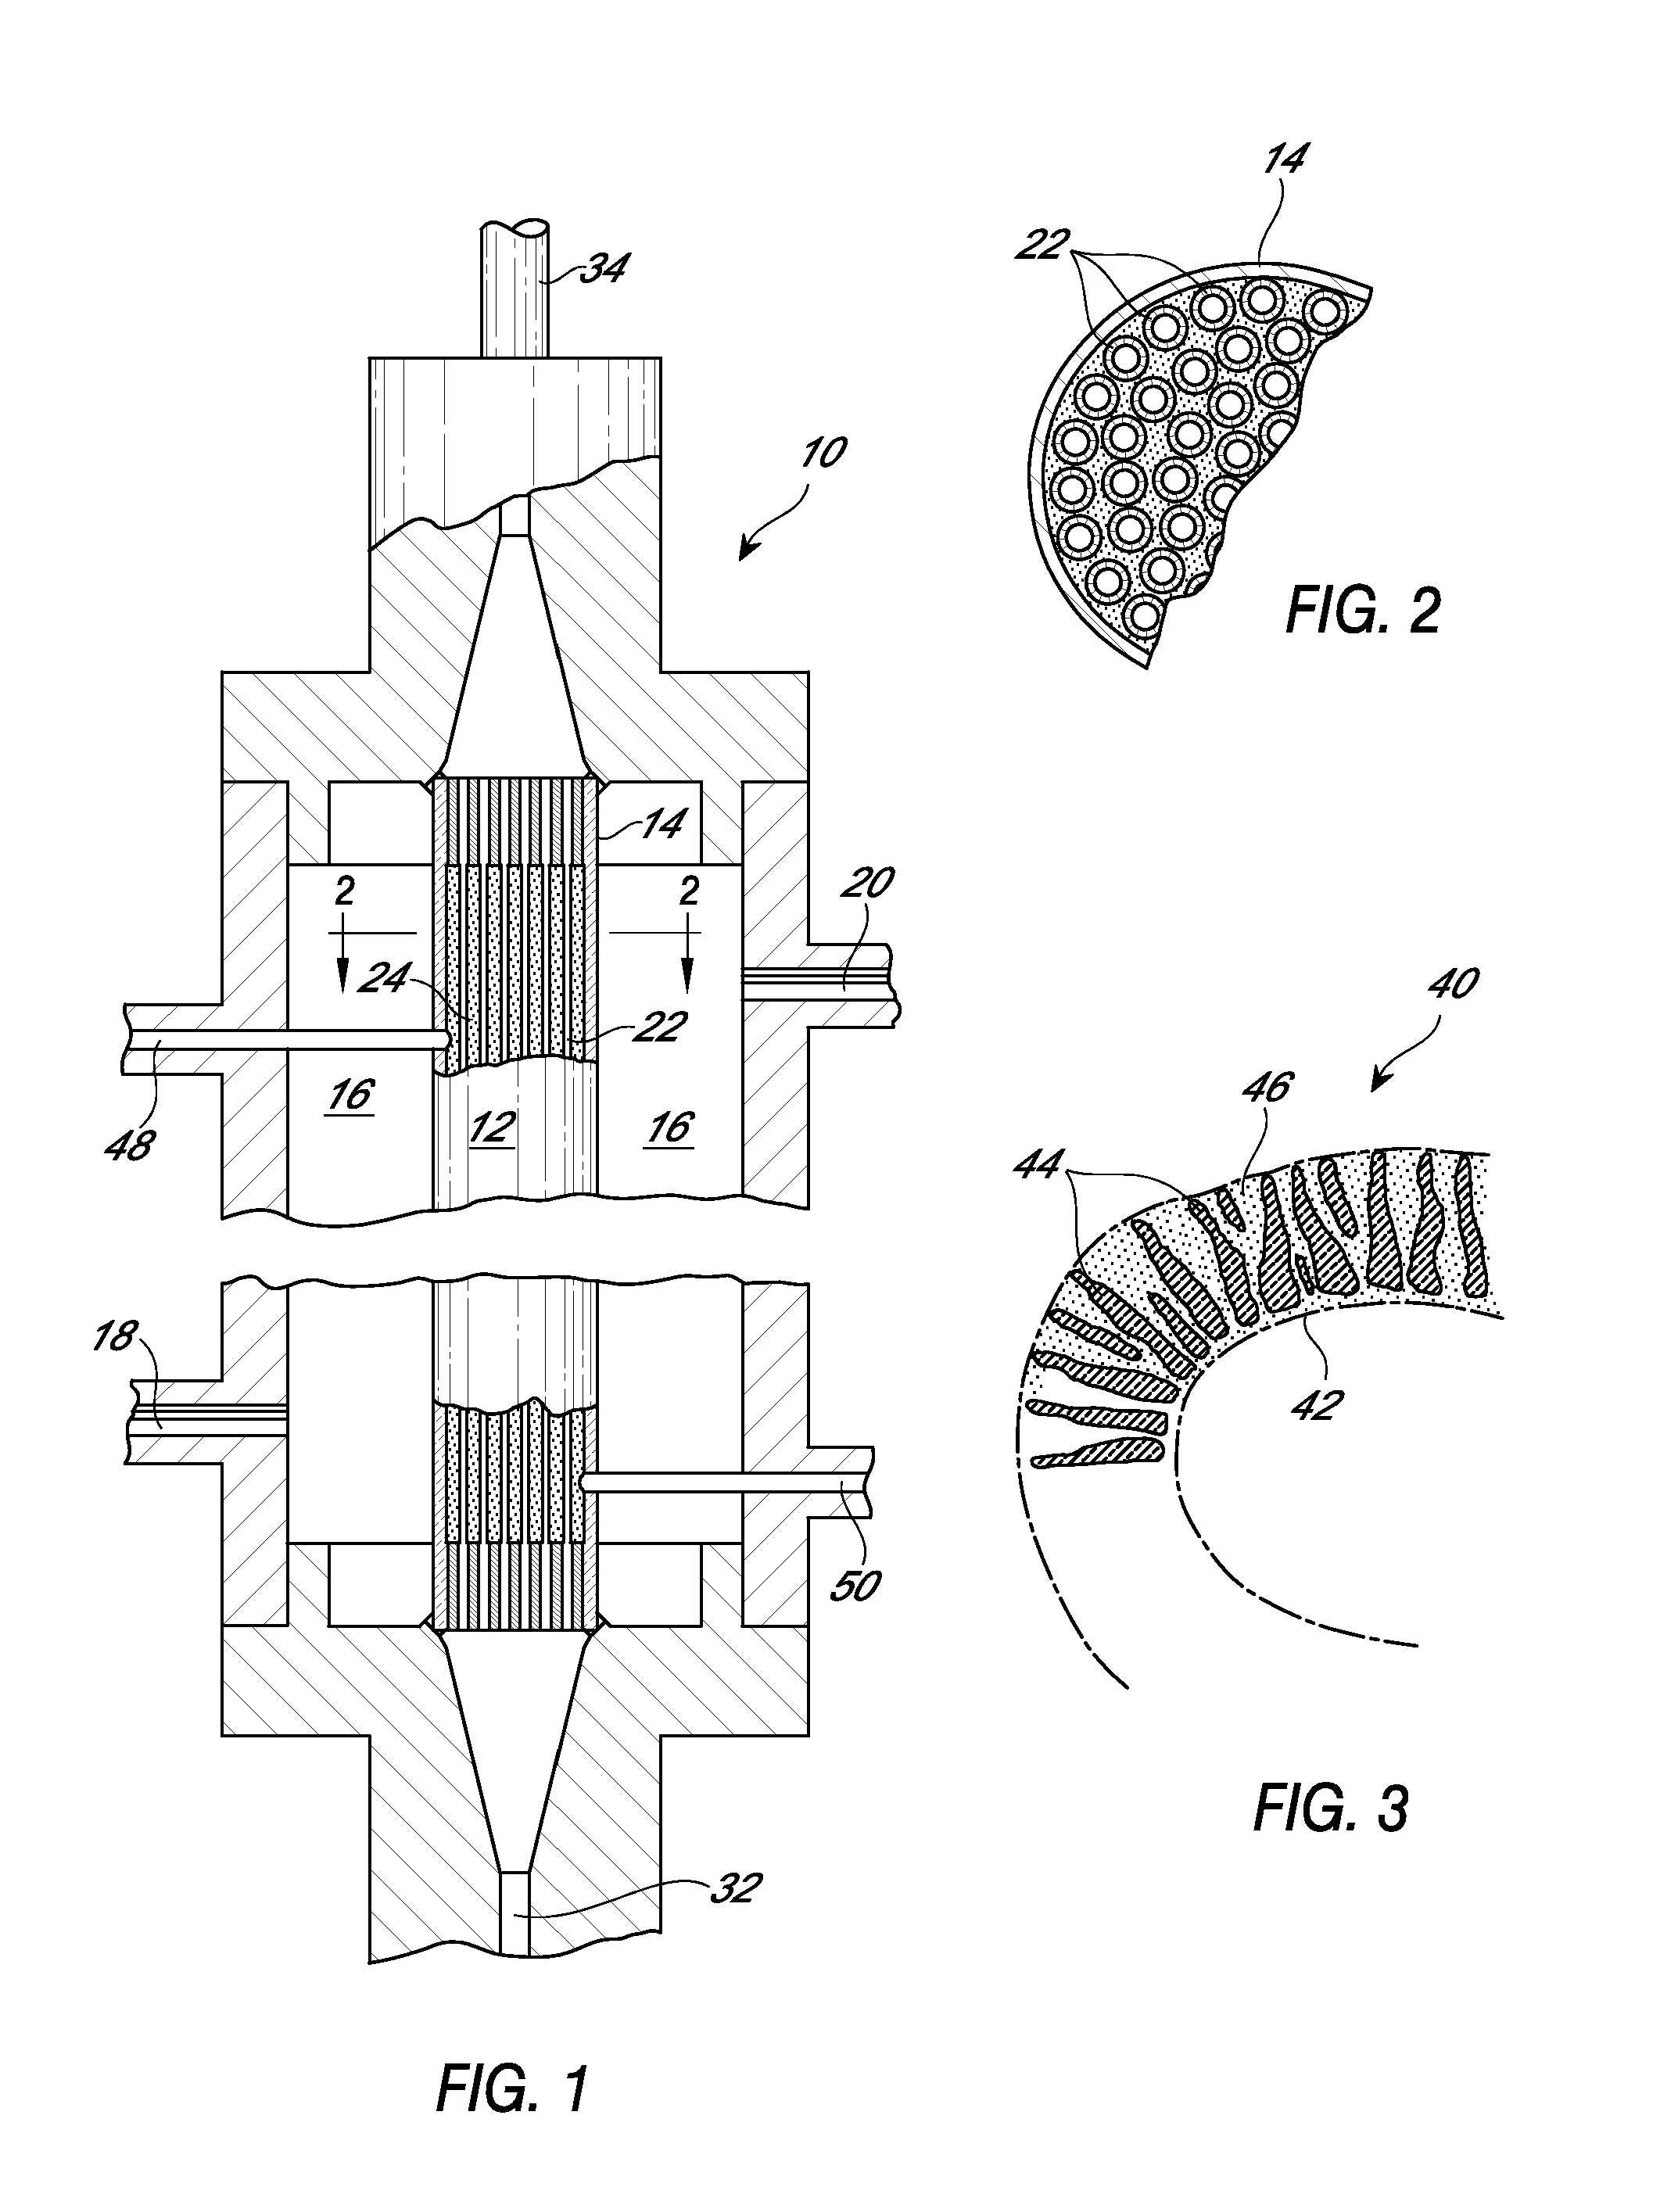 Device and method for purifying virally infected blood